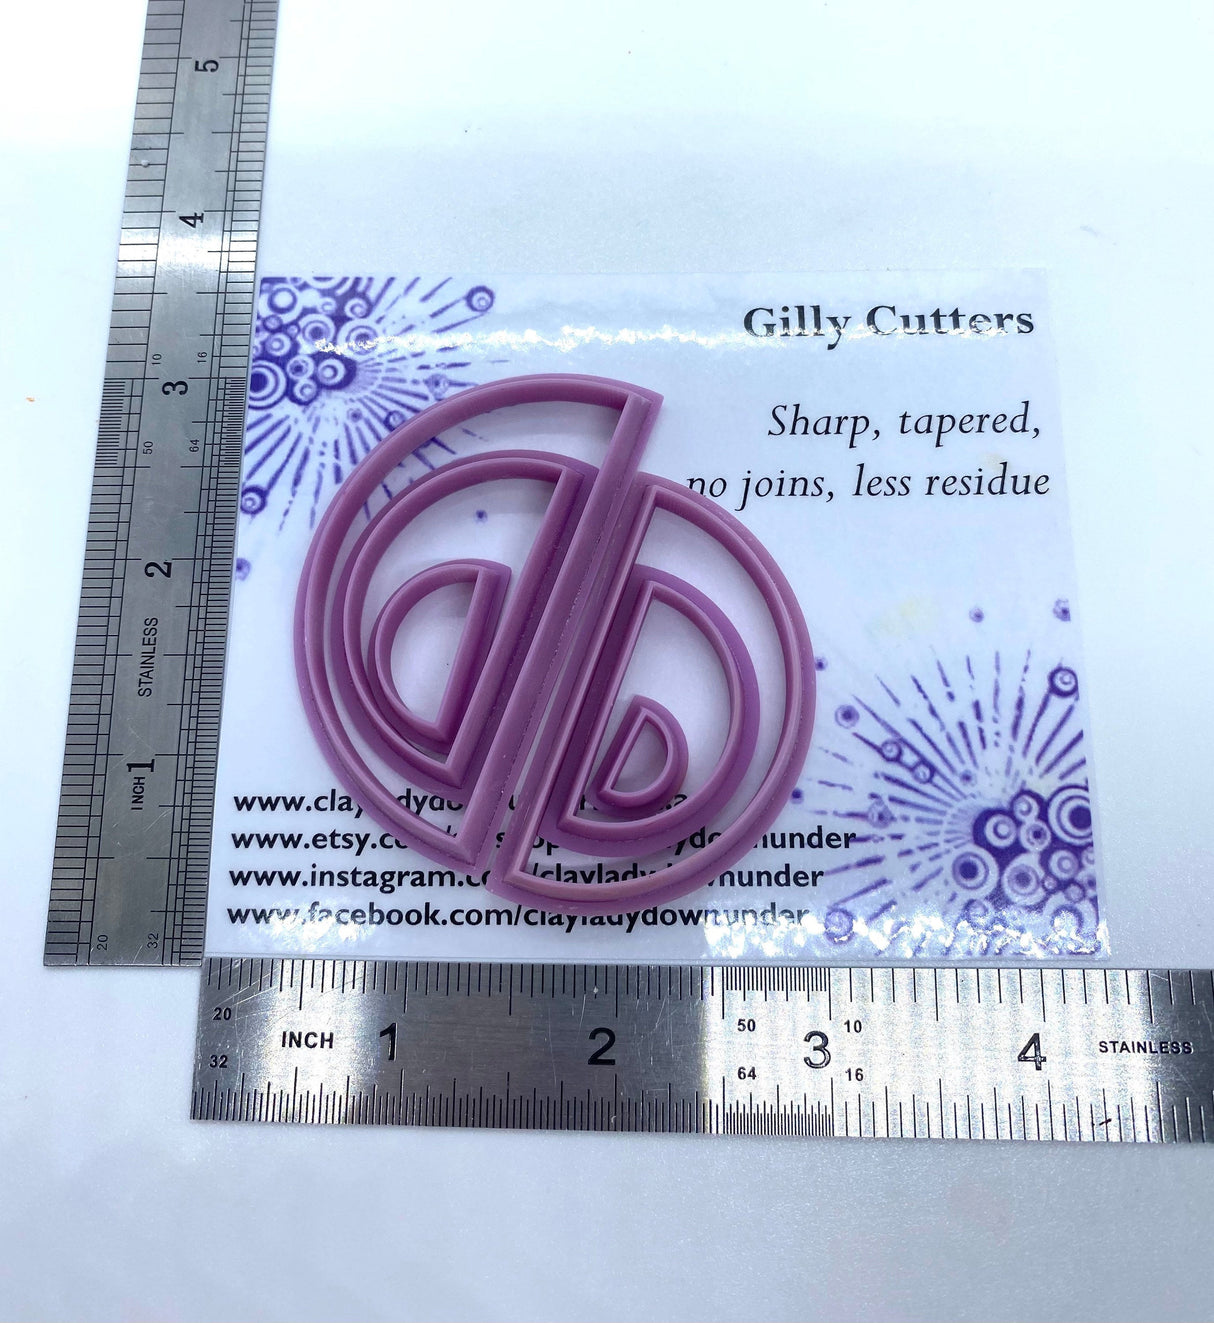 Resin Polymer clay cutters, precious metal, ceramic clay cutters, Gilly cutters (Lisa)